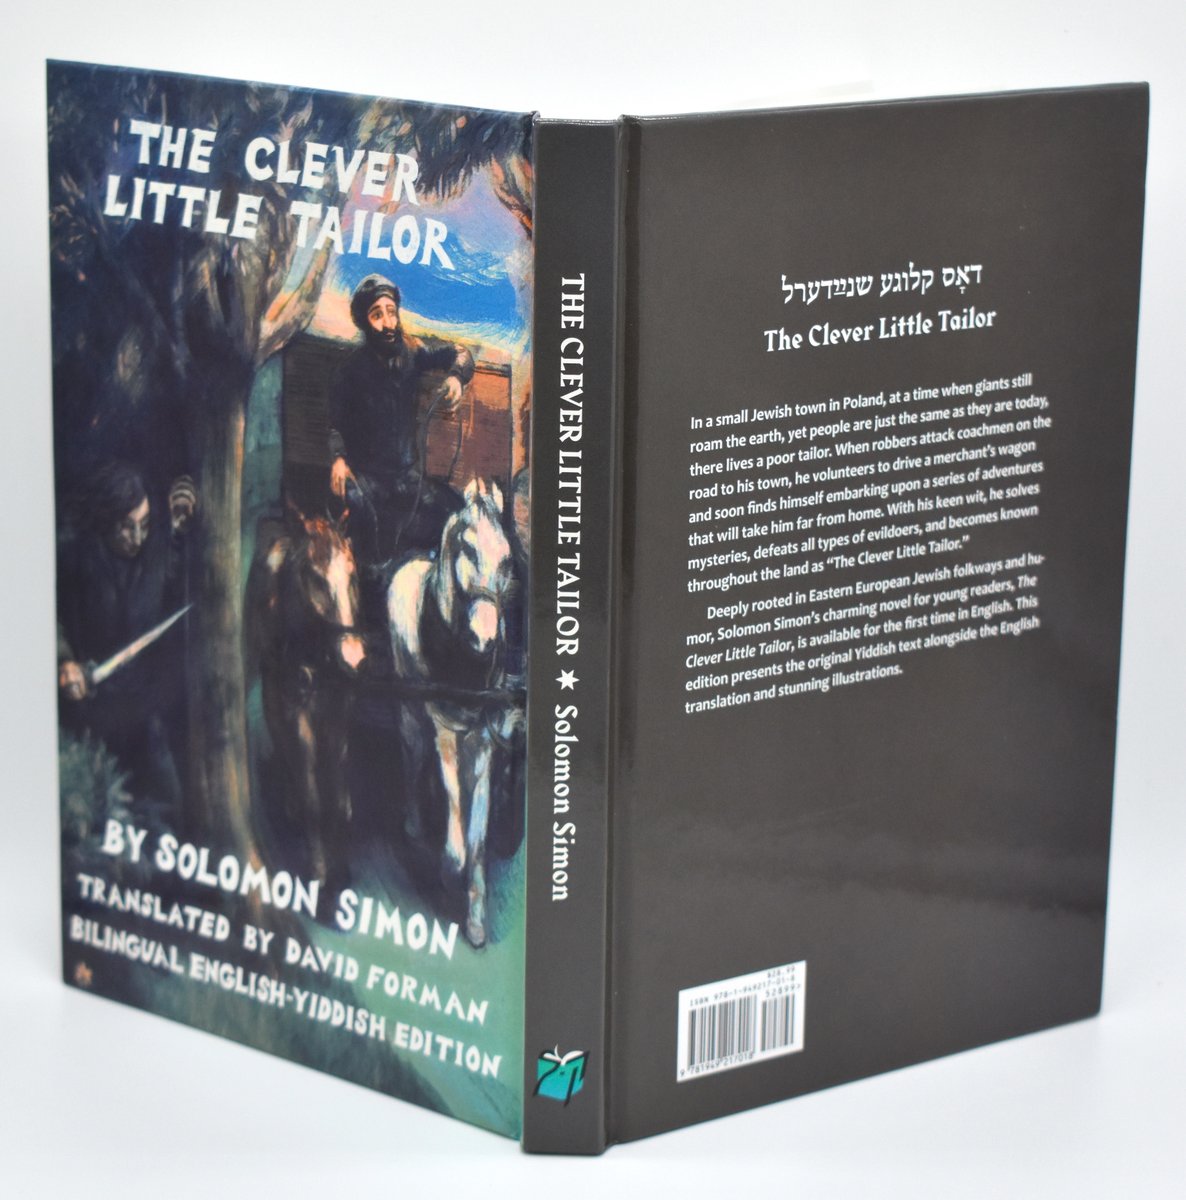 The Clever Little Tailor is now available on Amazon with free shipping for Prime members.
amazon.com/Clever-Little-…
מע קען שוין באַשטעלן 'דאָס קלוגע שנײַדערל' דורך 'עמעזאָן'.
#worldkidlit #yiddish #bilingualbook